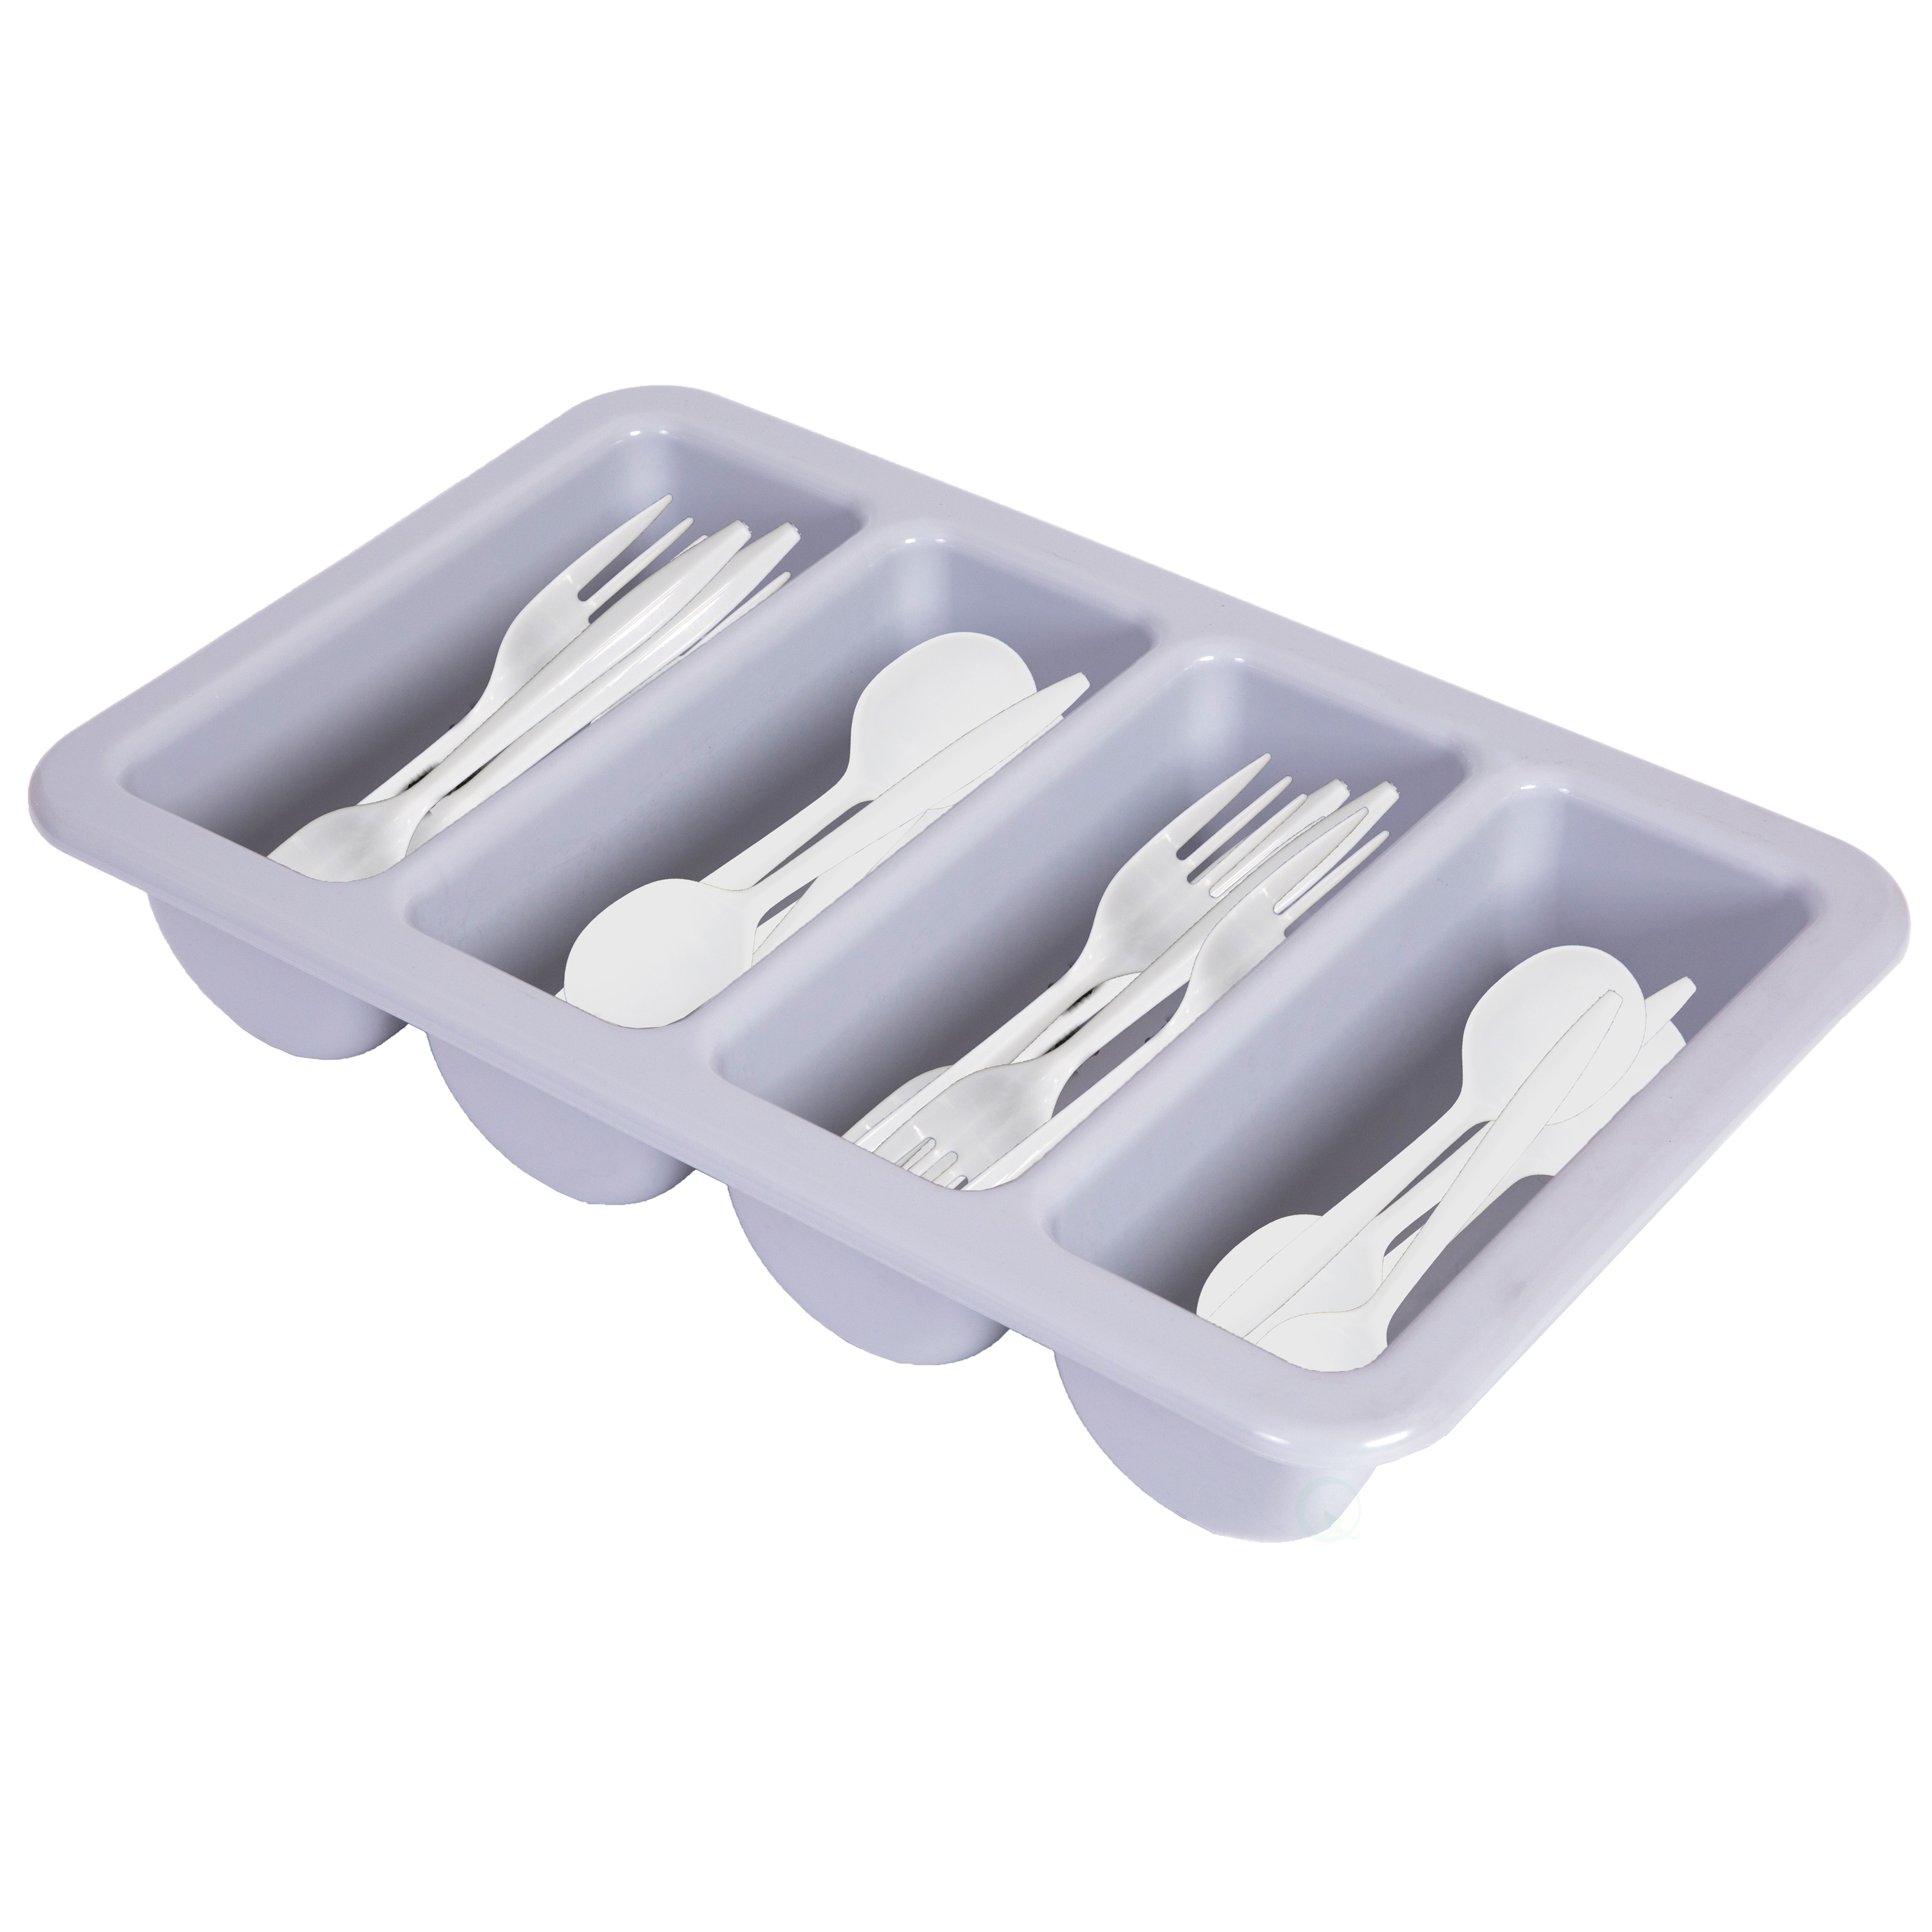 4-Compartment Commercial Cutlery Holder - Set of 10